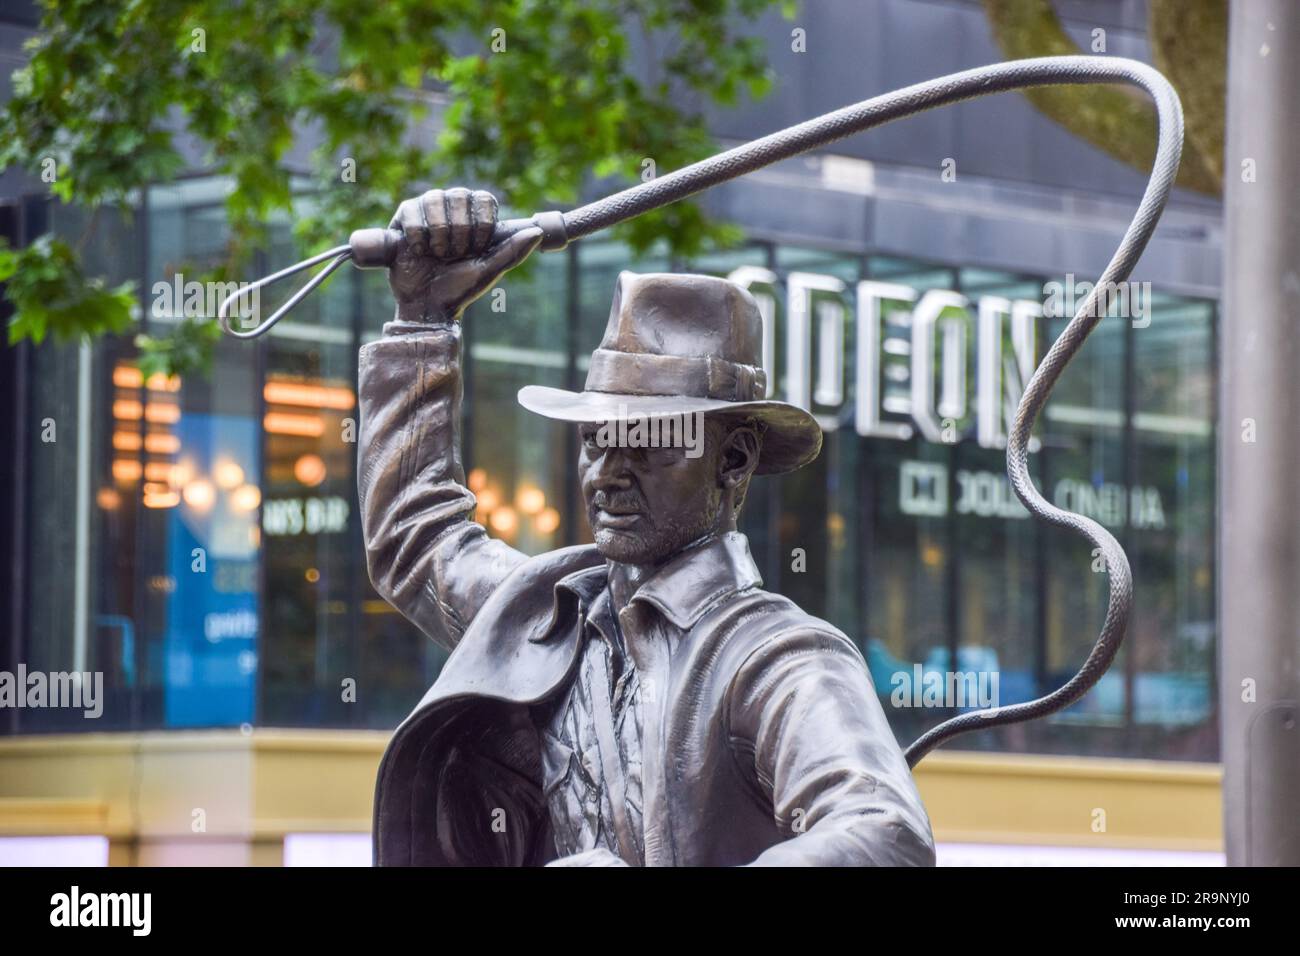 London, UK. 28th June 2023. A new sculpture of Indiana Jones has been unveiled in Leicester Square, part of the permanent statue trail 'Scenes In The Square' featuring famous film characters. The unveiling of the statue coincides with the UK opening of Indiana Jones and the Dial of Destiny. Credit: Vuk Valcic/Alamy Live News Stock Photo